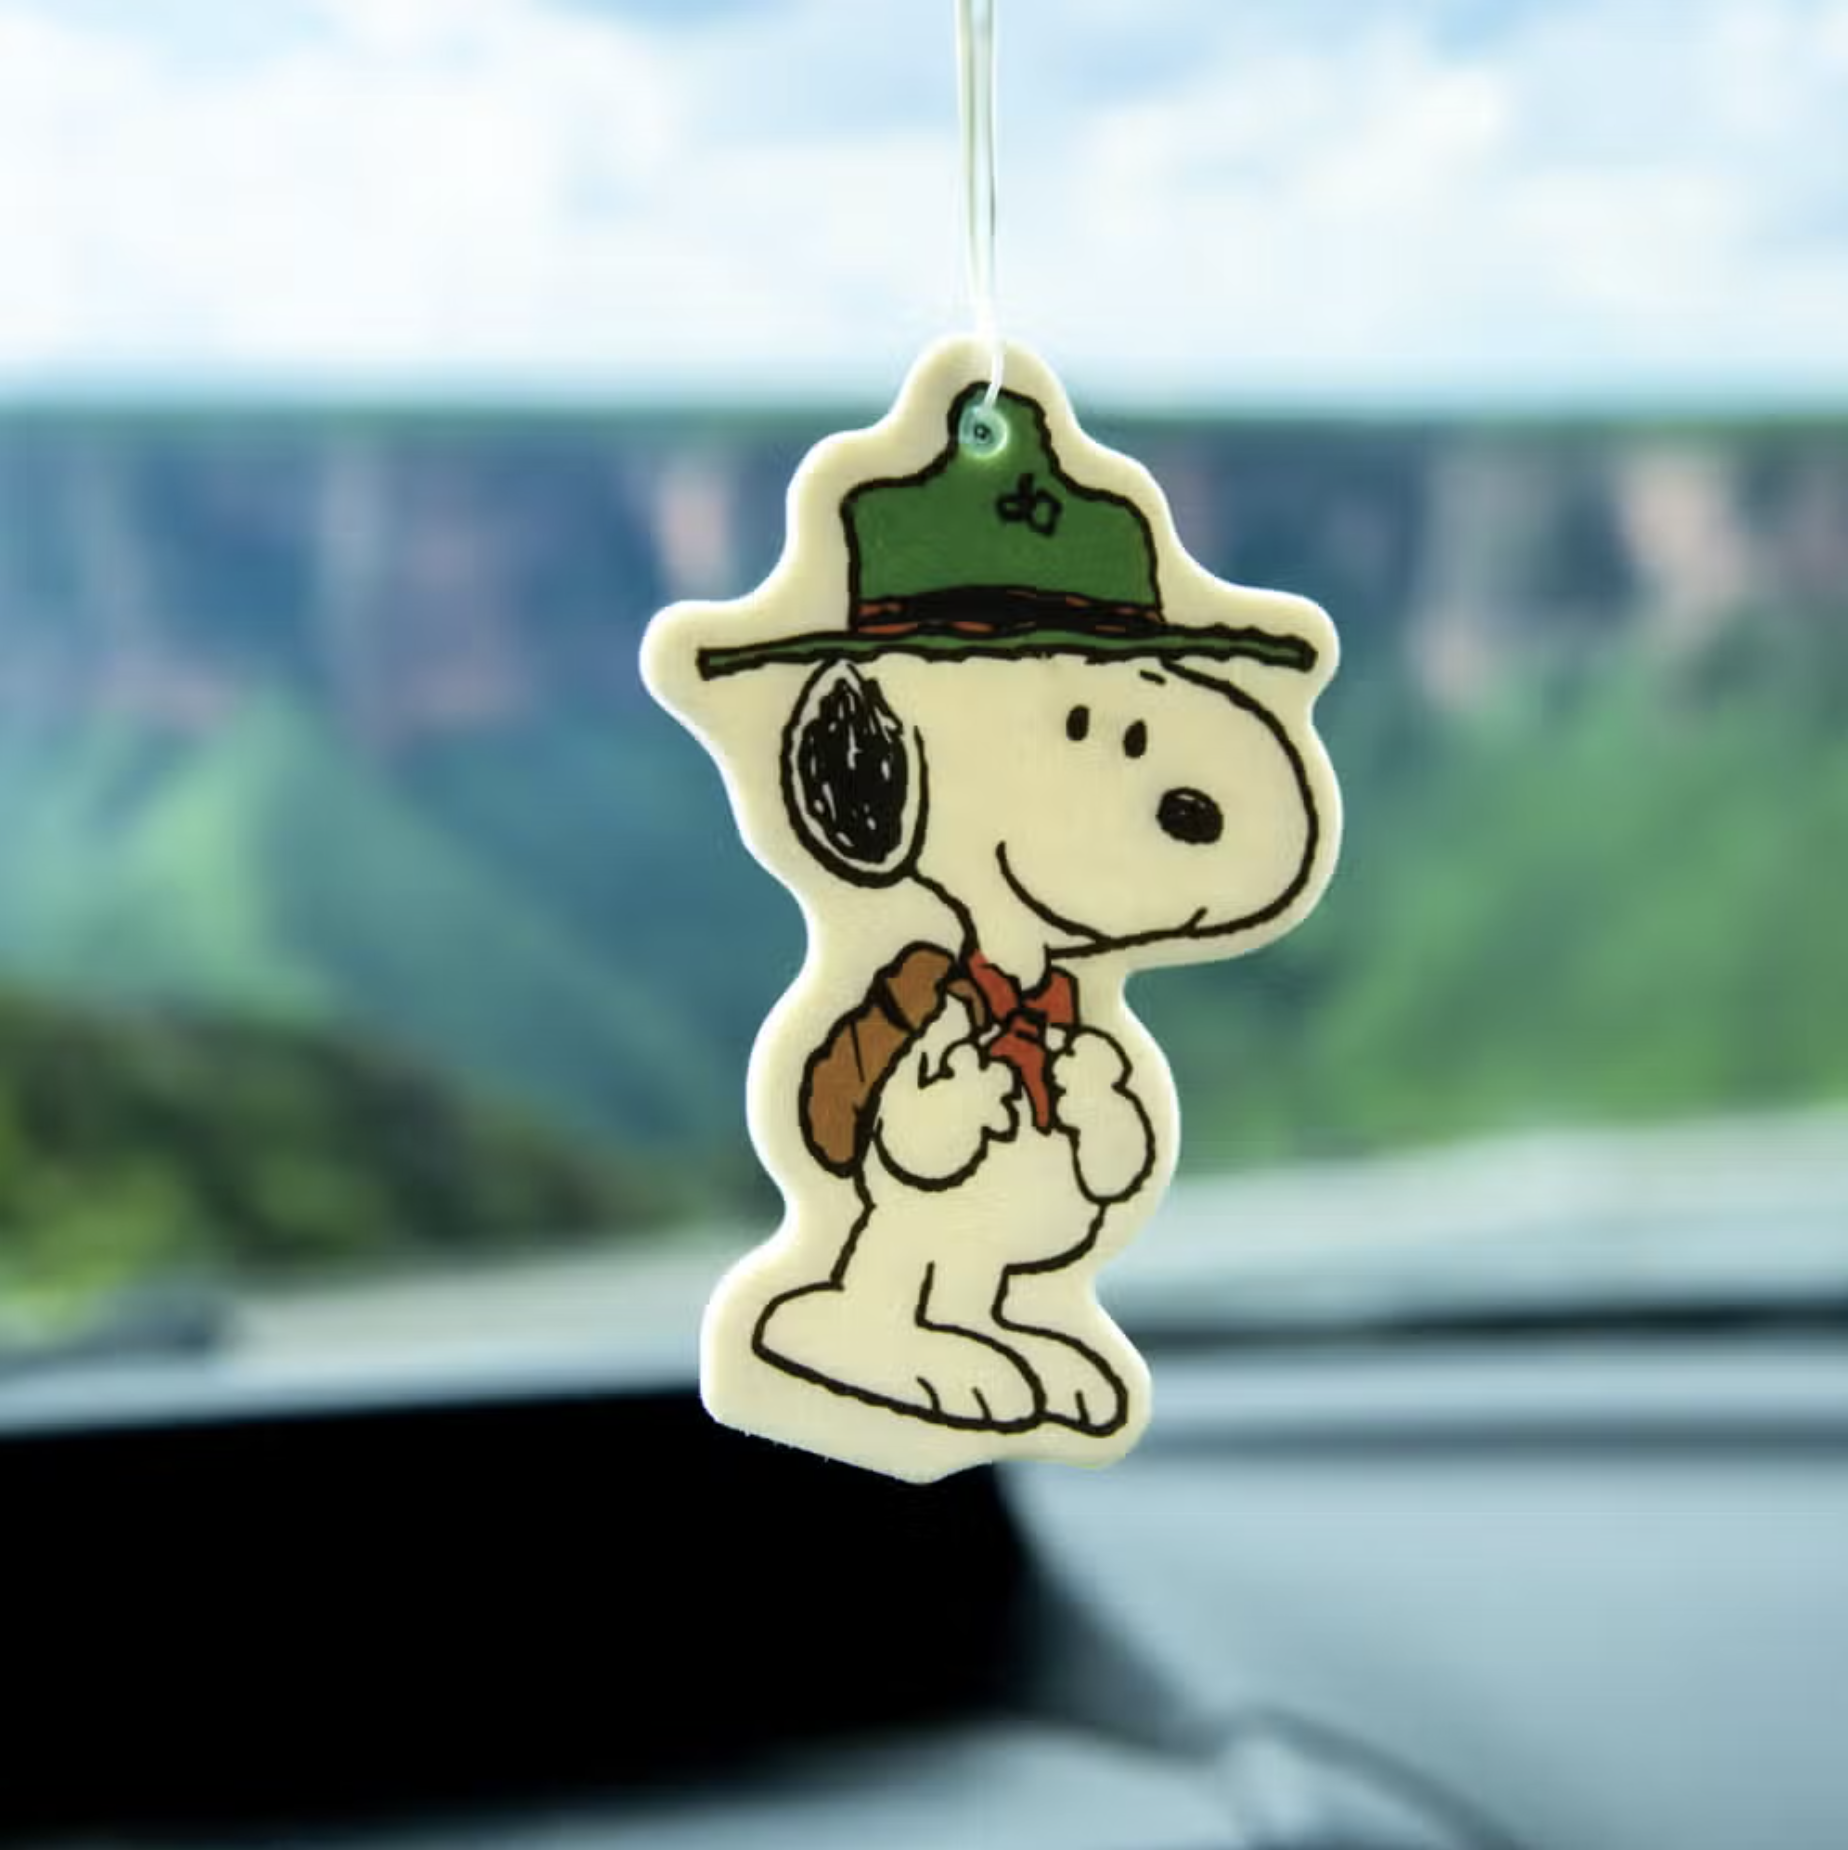 Snoopy Scout Air Freshener